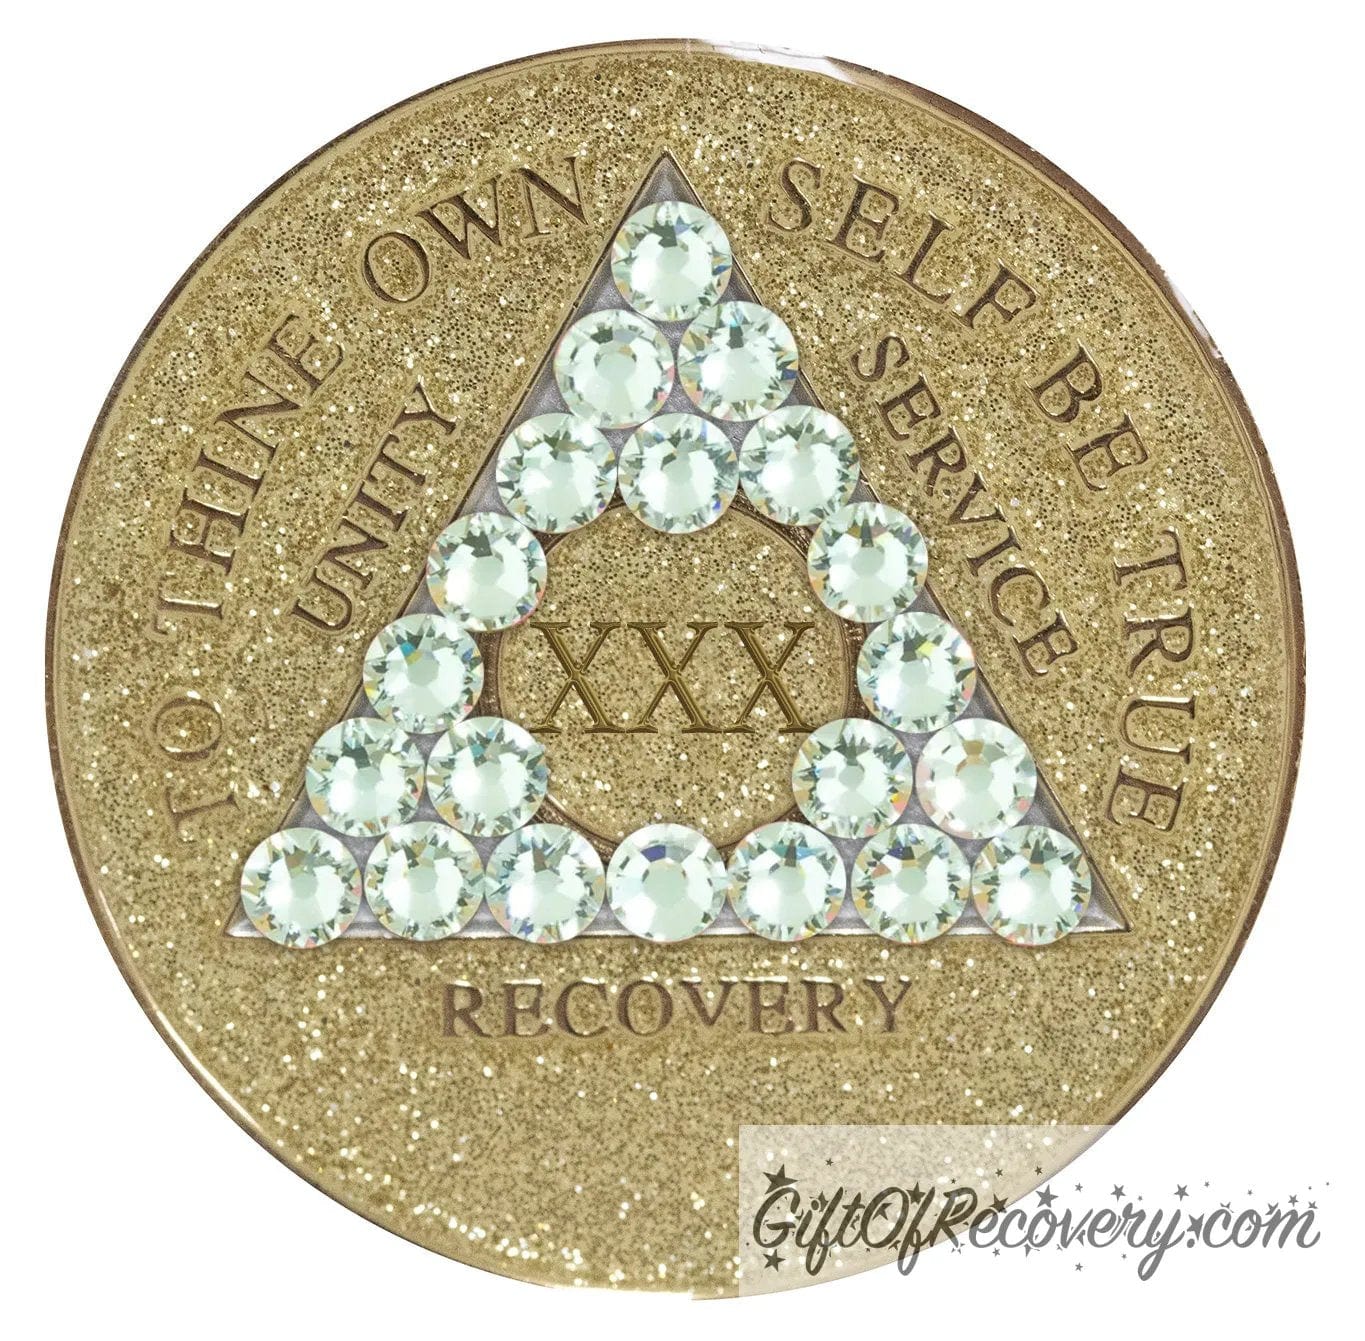 30 year AA medallion in gold glitter with twenty-one genuine diamond CZ crystals in the shape of a triangle, symbolizing transformation under pressure, to thine own self be true, unity, service, recovery and roman numeral are embossed with 14k gold-plated brass along with outer rim, sealed in a chip and scratch-resistant resin giving it a beautiful glossy look.